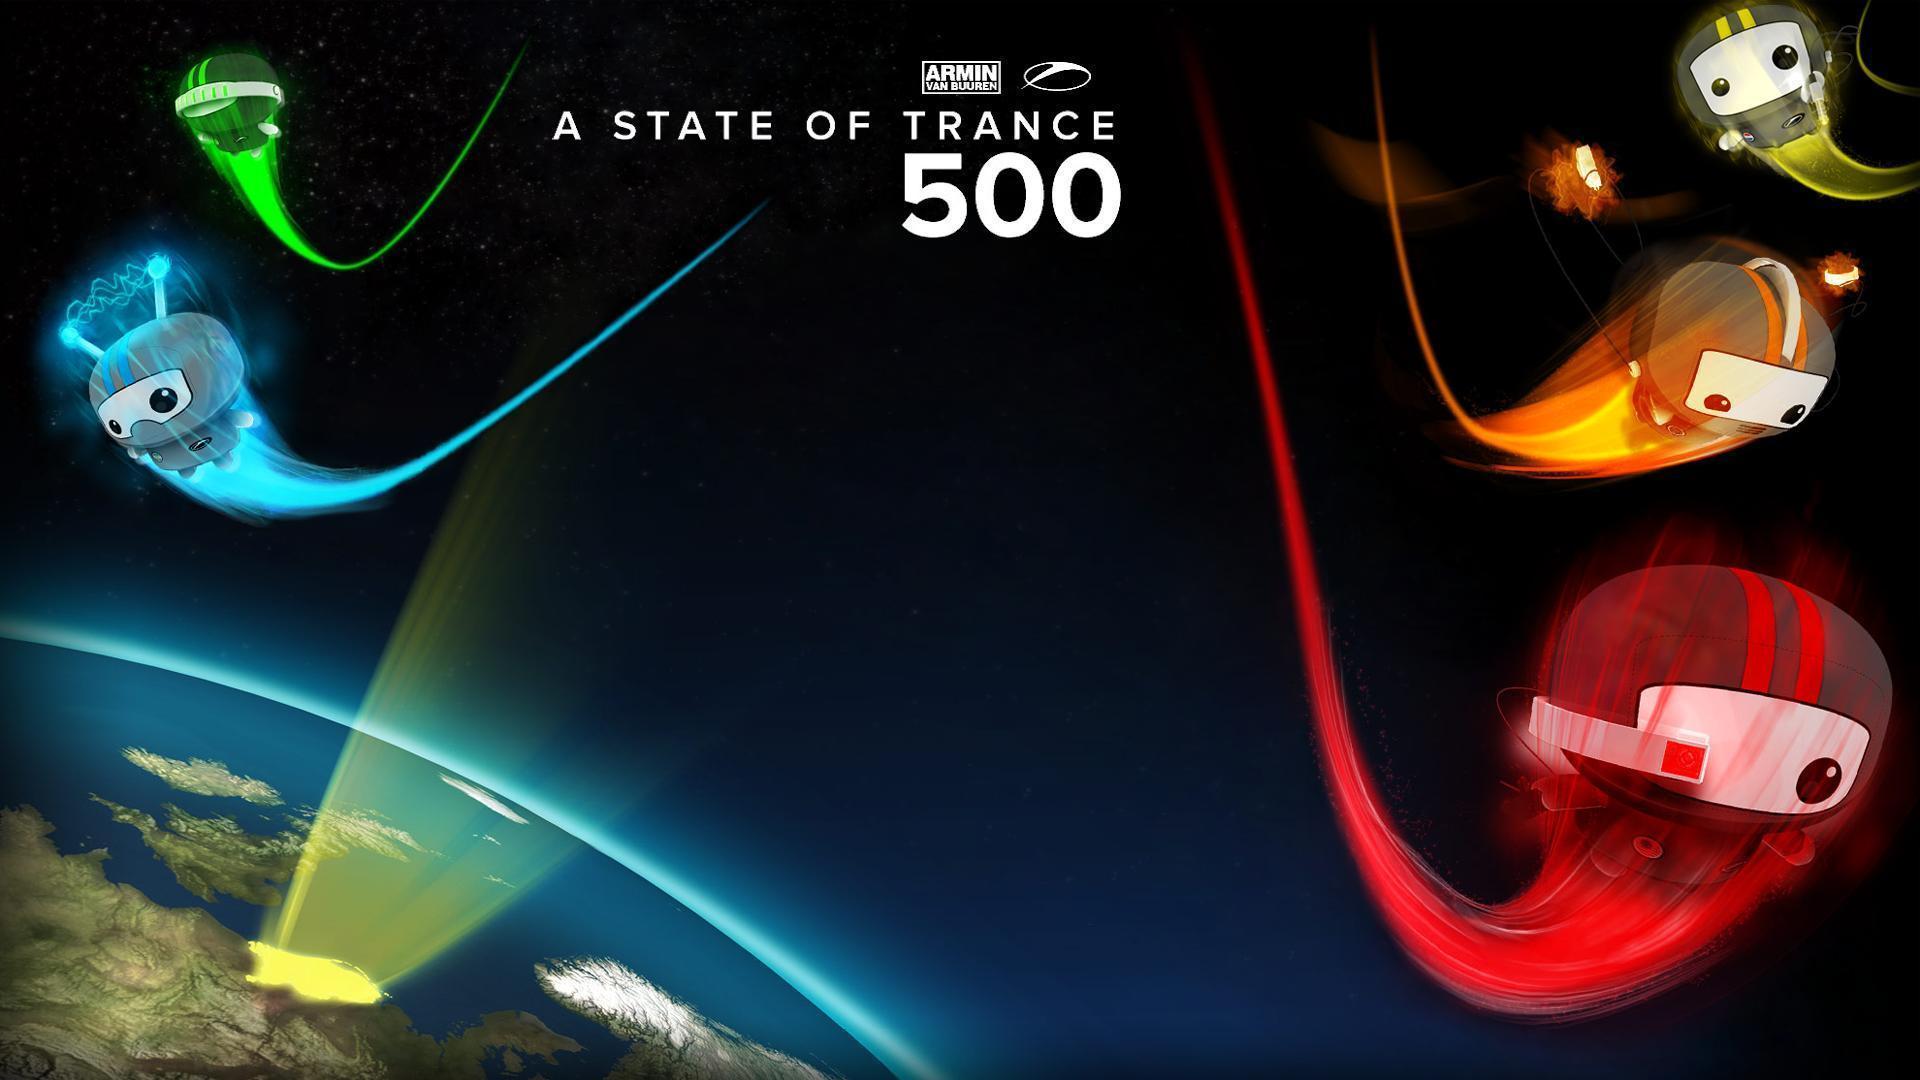 A State Of Trance 550 Wallpaper Armin Van Buuren A State Of Trance